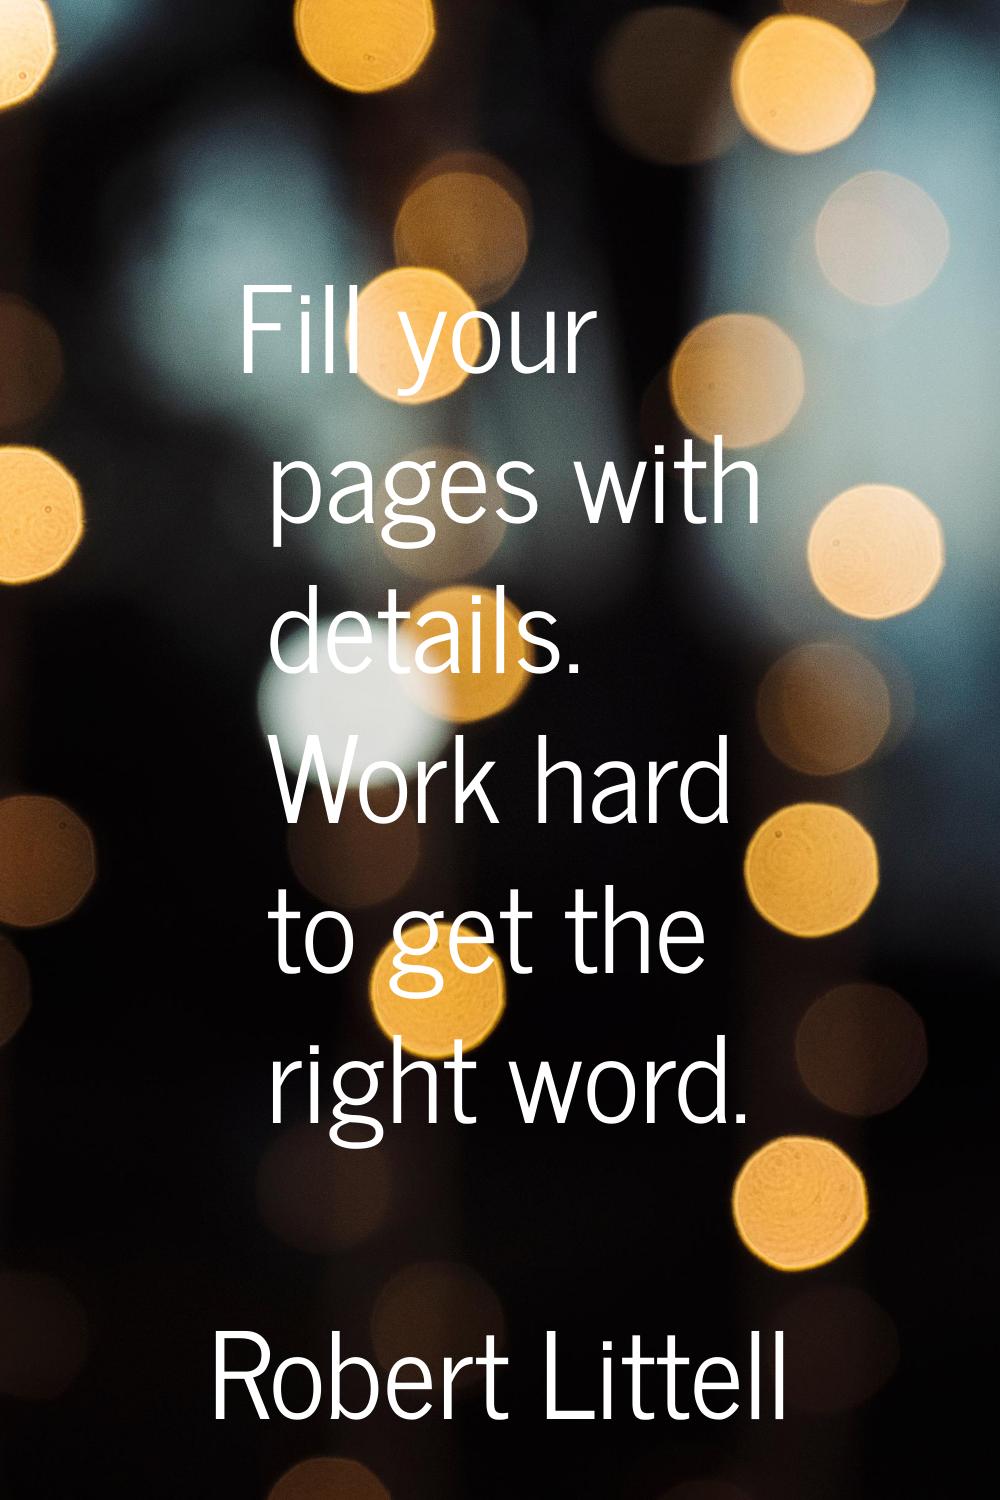 Fill your pages with details. Work hard to get the right word.